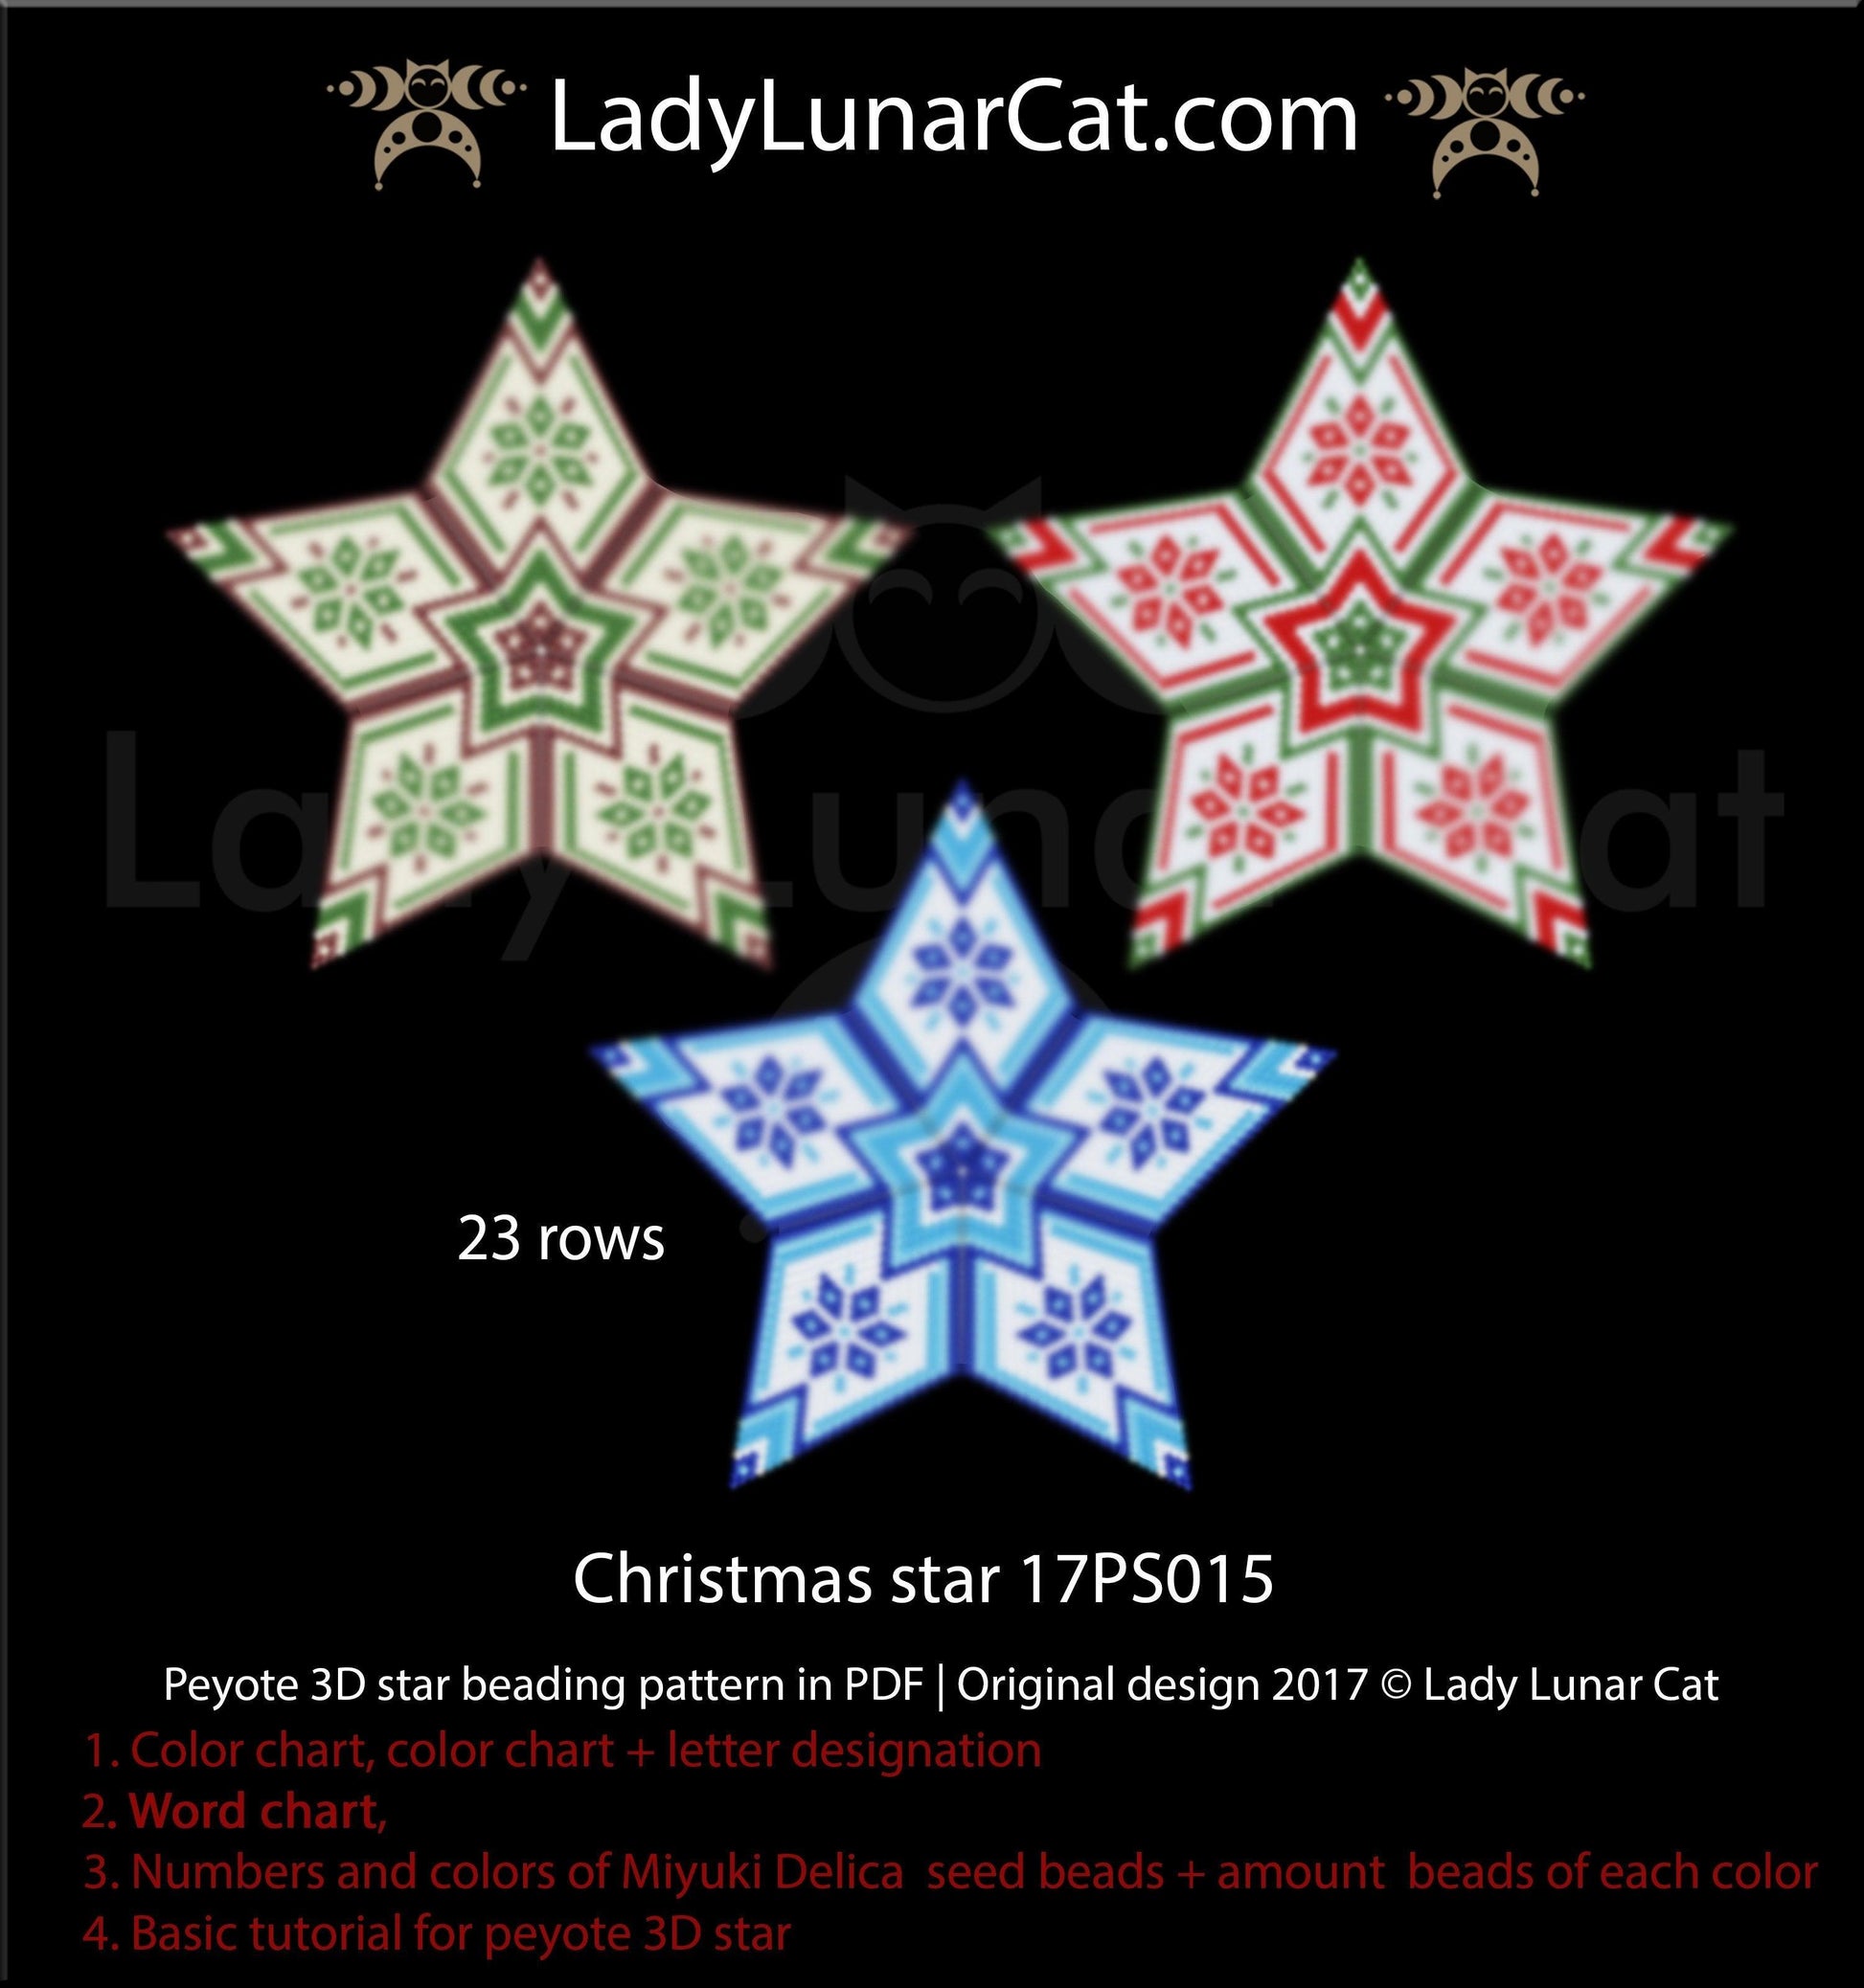 Copy of Beaded star pattern for beadweaving Christmas 21PS001 LadyLunarCat